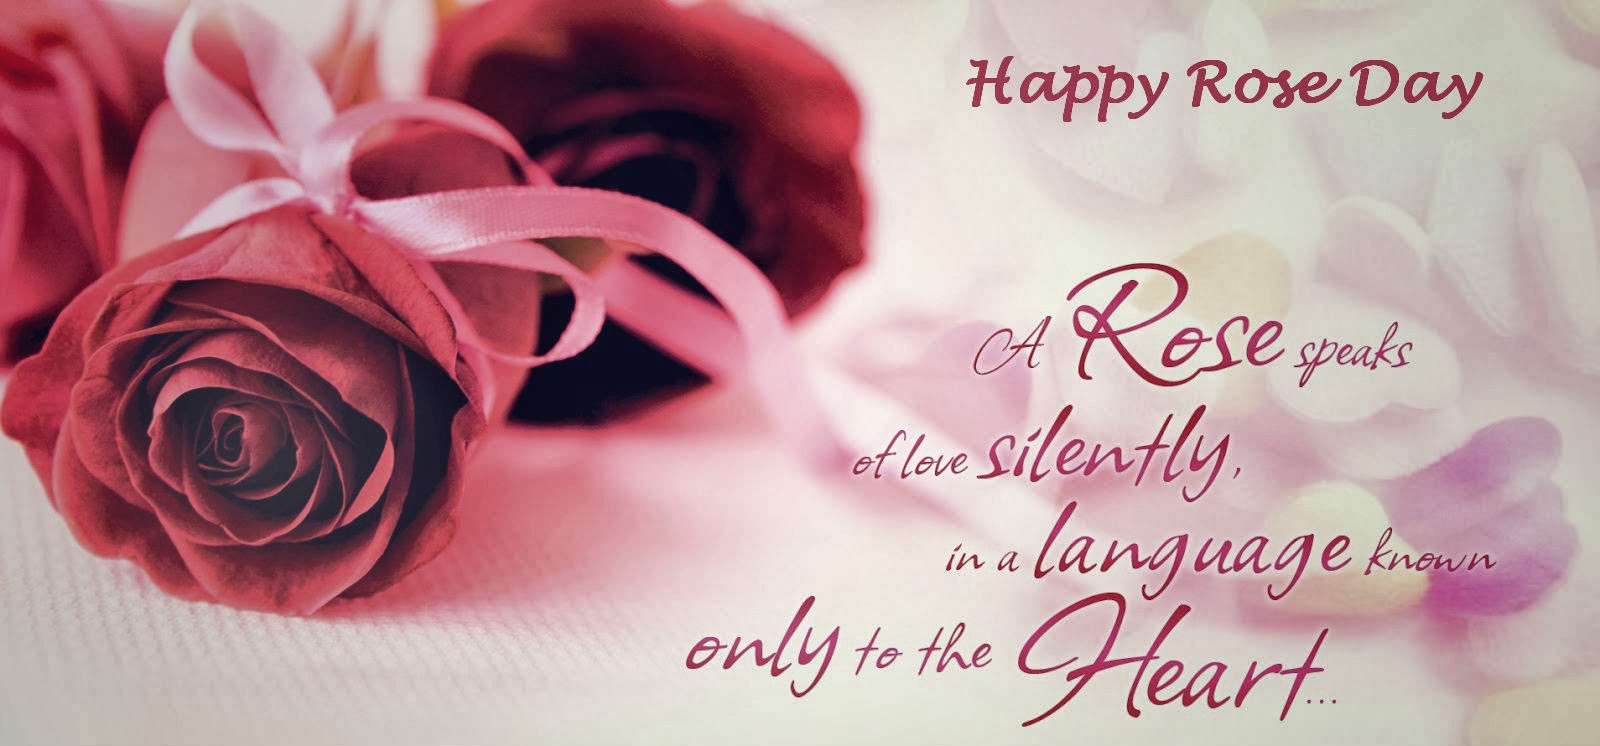 Rose Day Wallpaper Quotes And Greetings Card